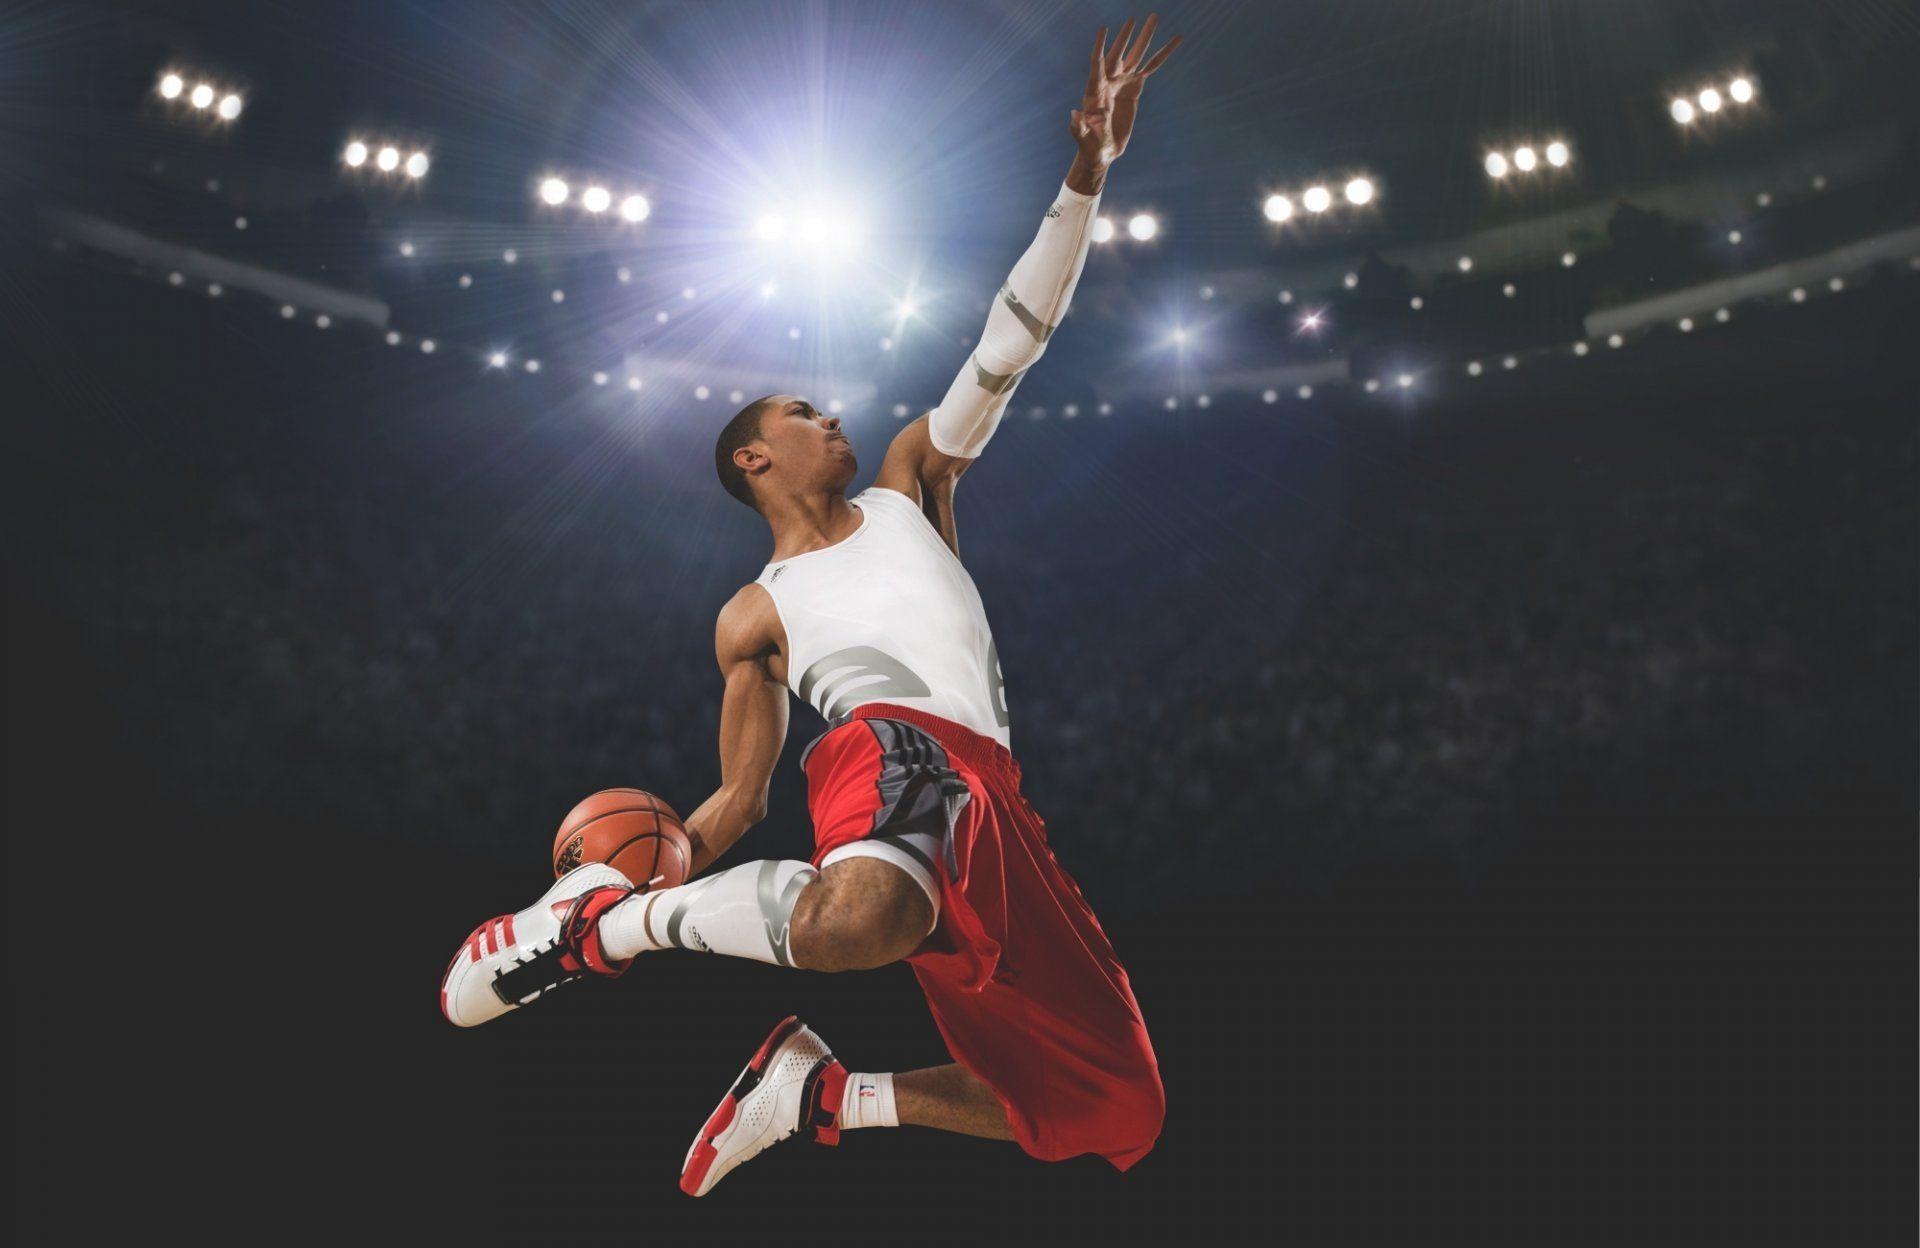 Free Best Adidas Basketball Image on your PC